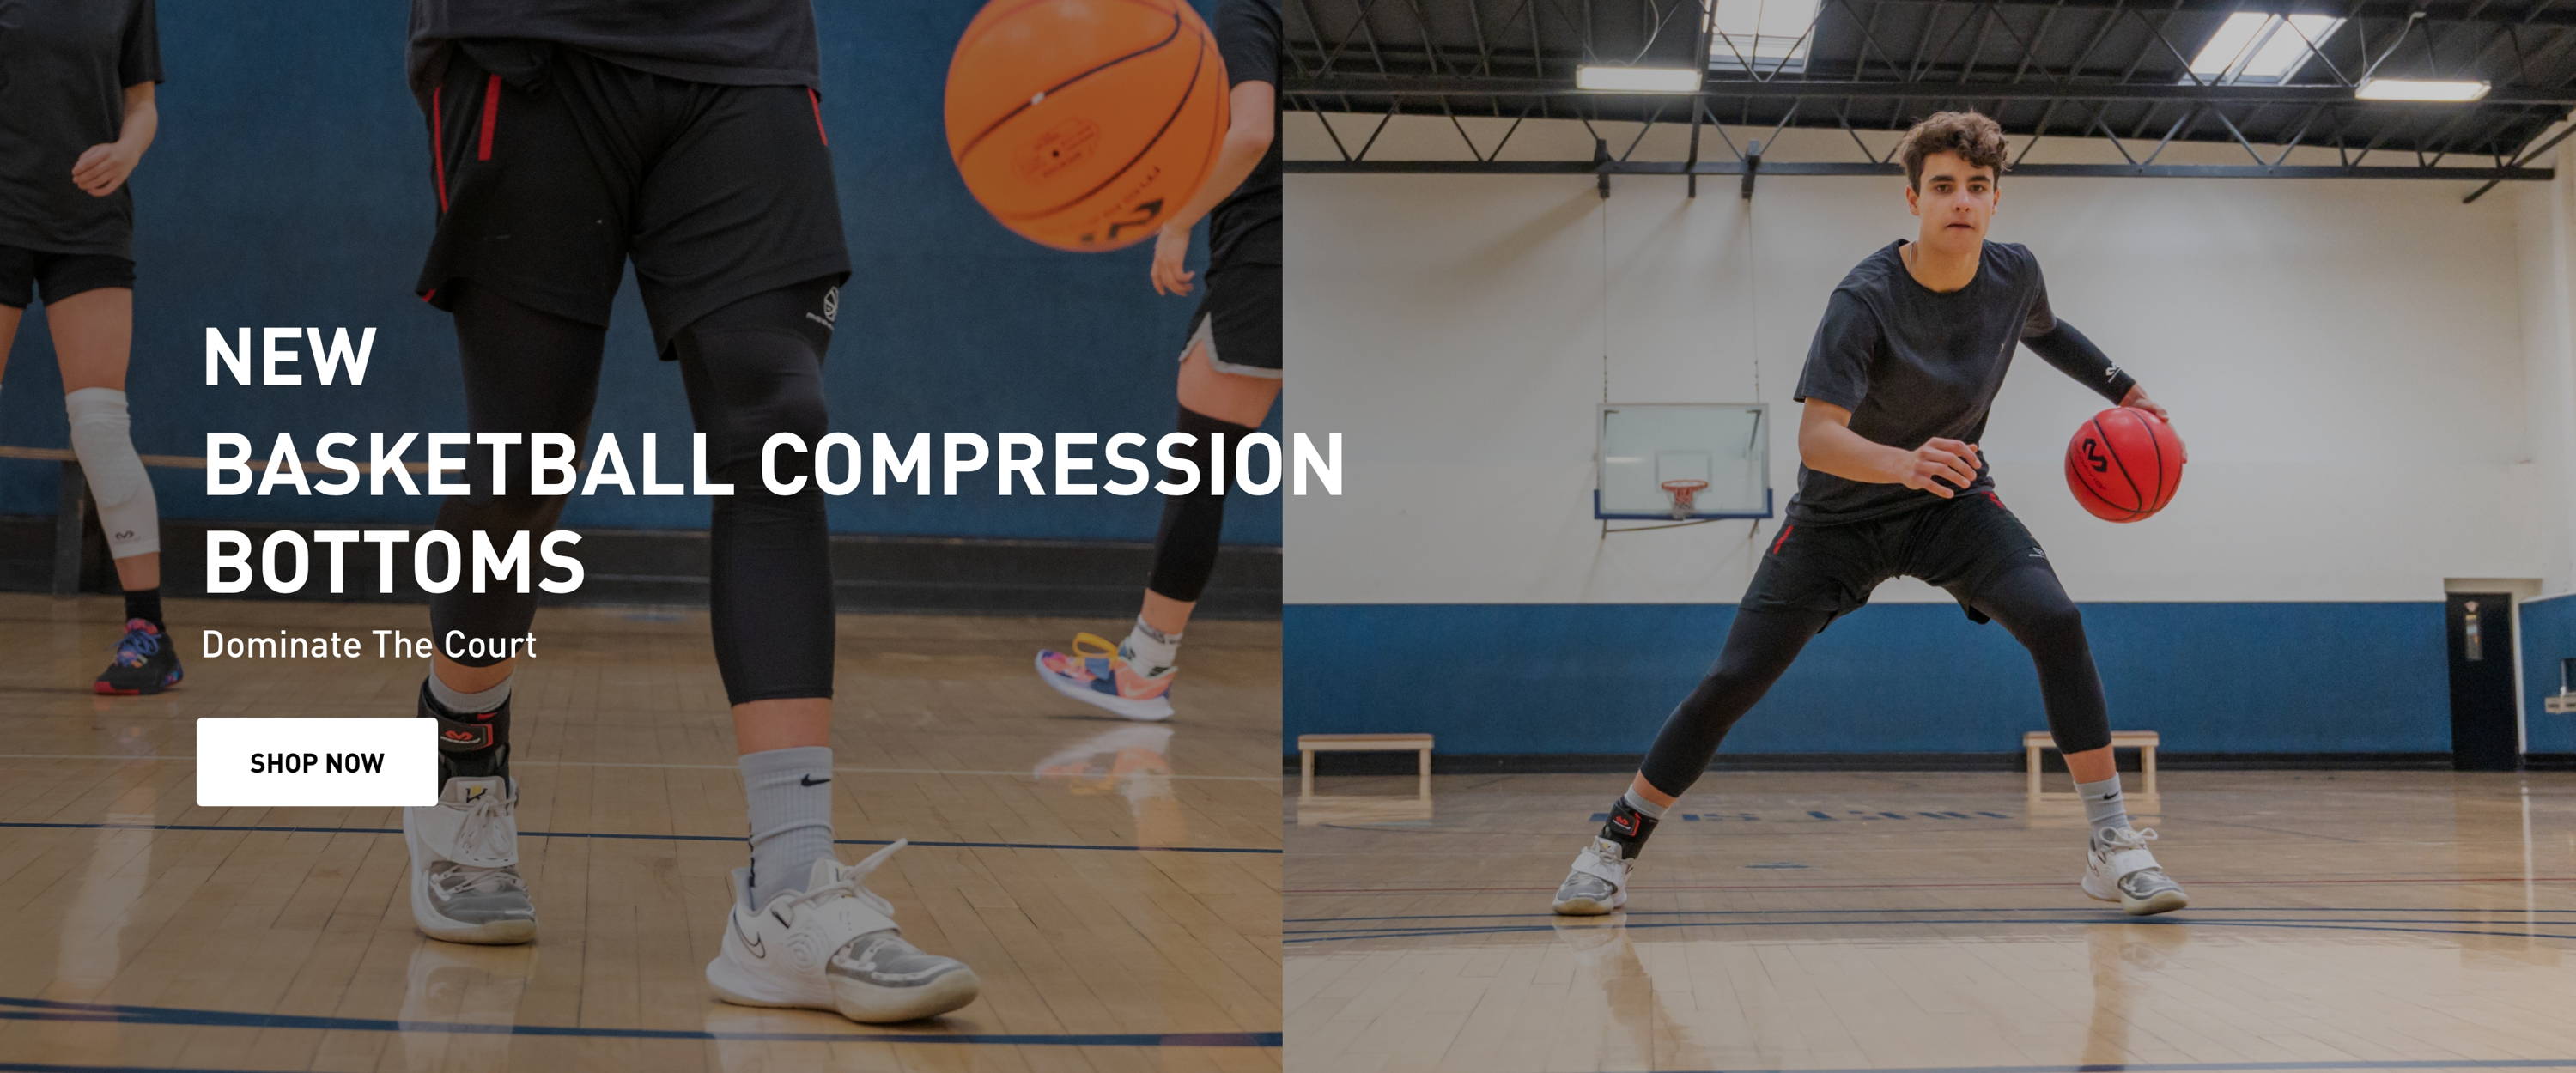 NEW Basketball Compression Bottoms Dominate the Court SHOP NOW